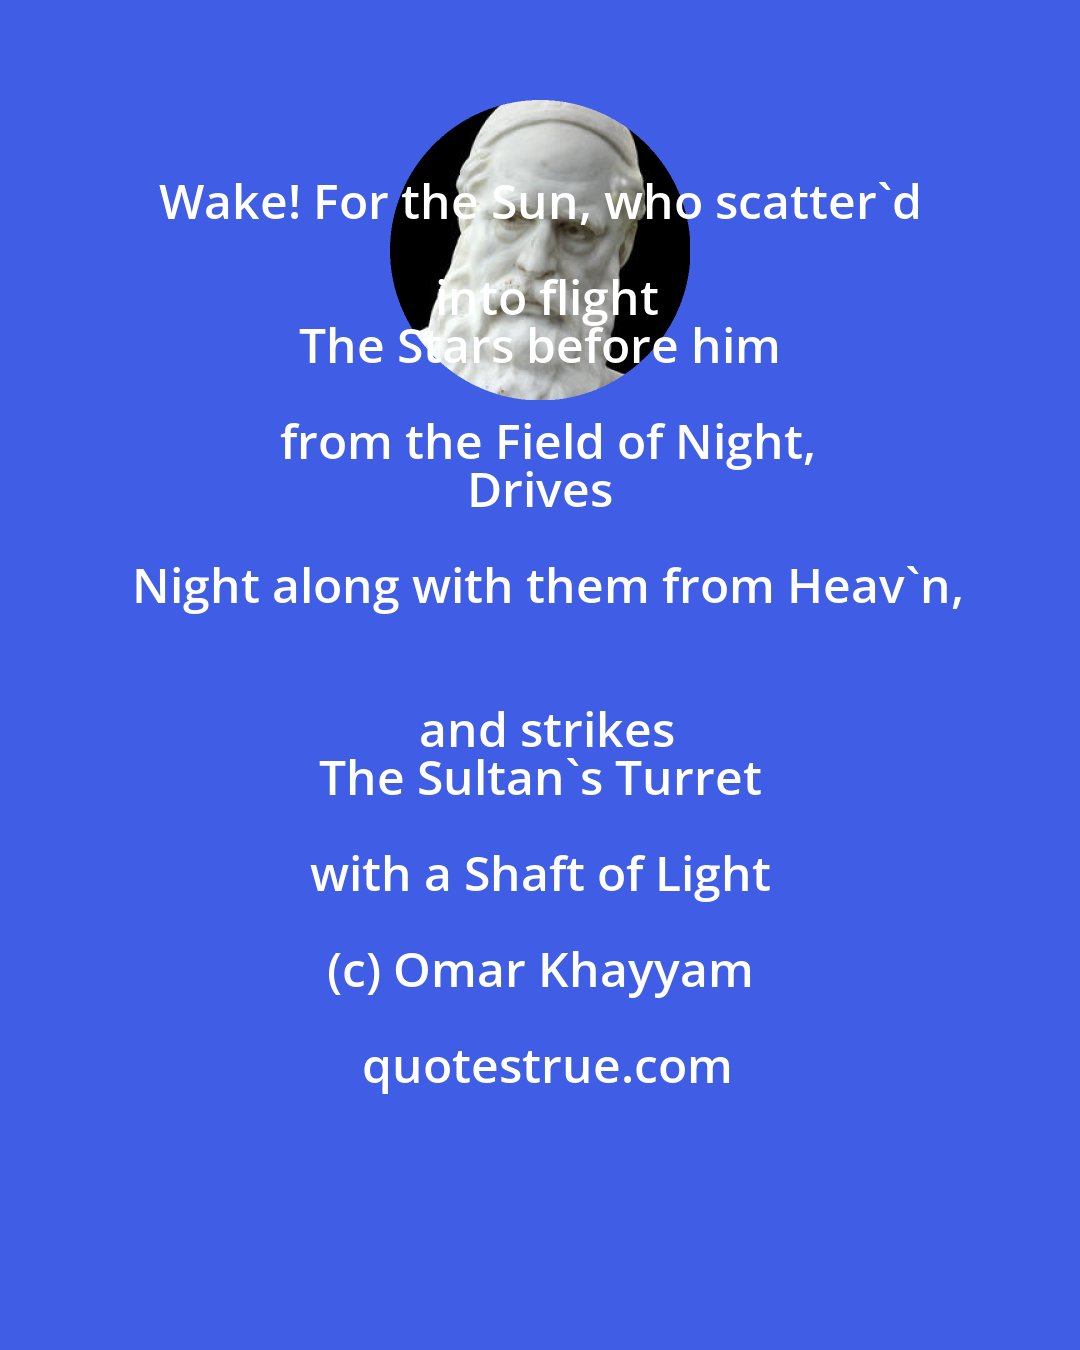 Omar Khayyam: Wake! For the Sun, who scatter'd into flight
 The Stars before him from the Field of Night,
 Drives Night along with them from Heav'n,
 and strikes
 The Sultan's Turret with a Shaft of Light